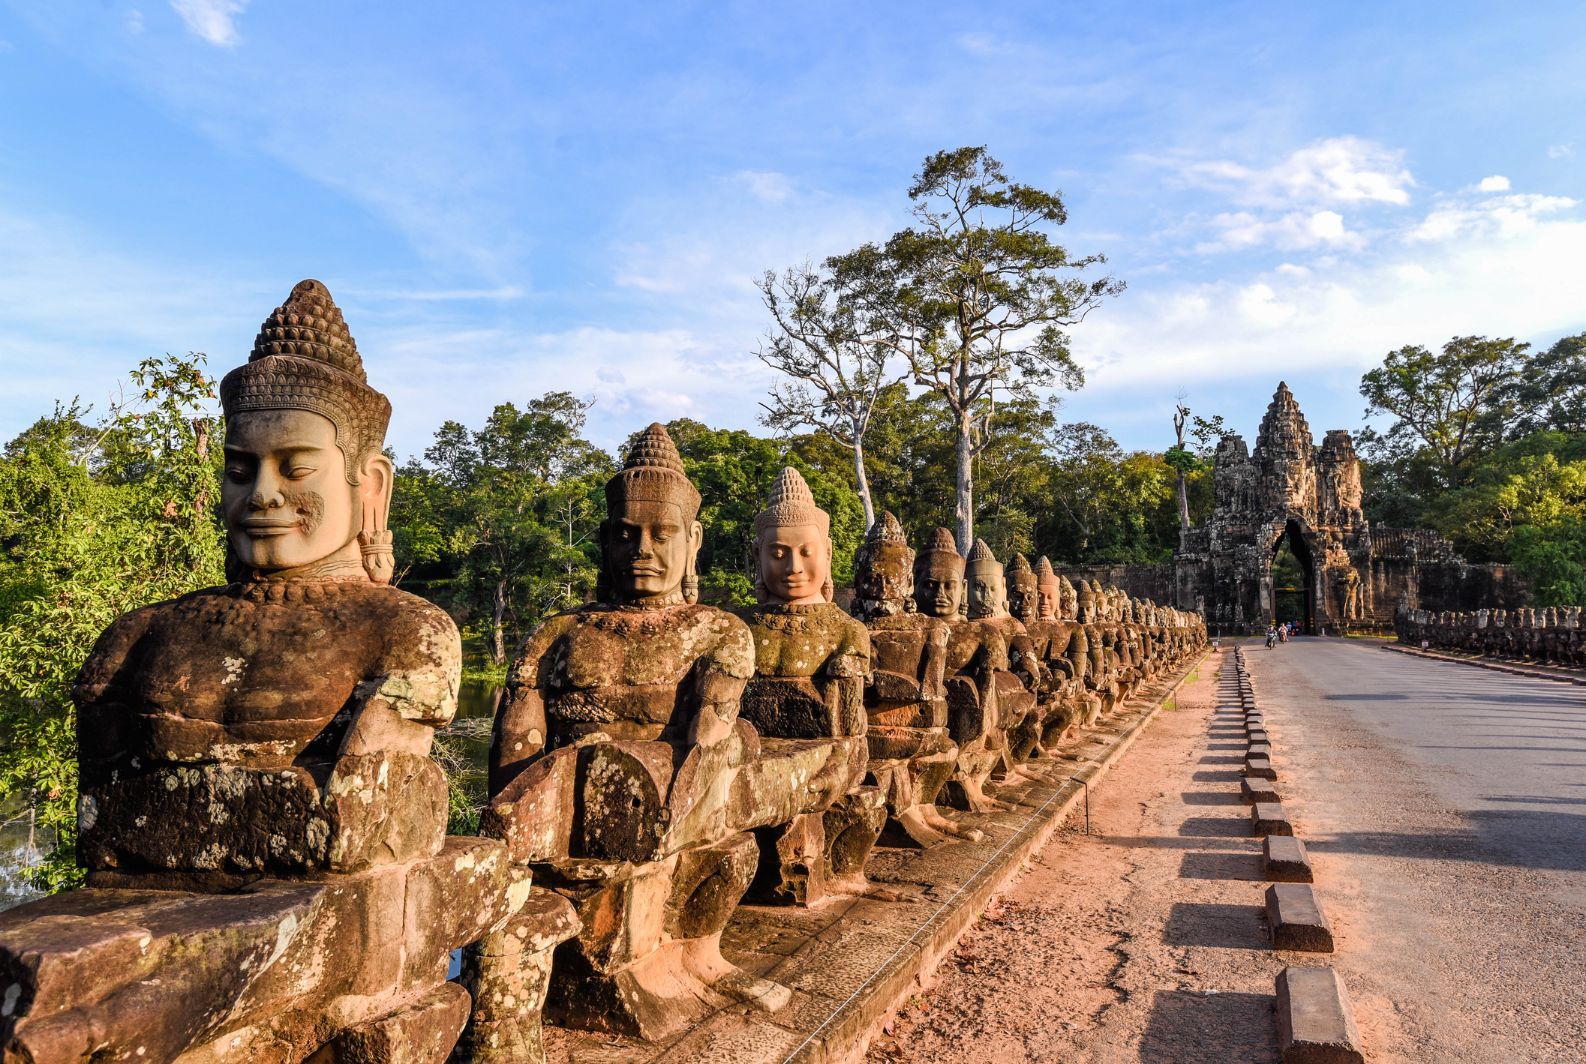 The statues lining the Western Gopura, on the entry bridge to Angkor Wat.